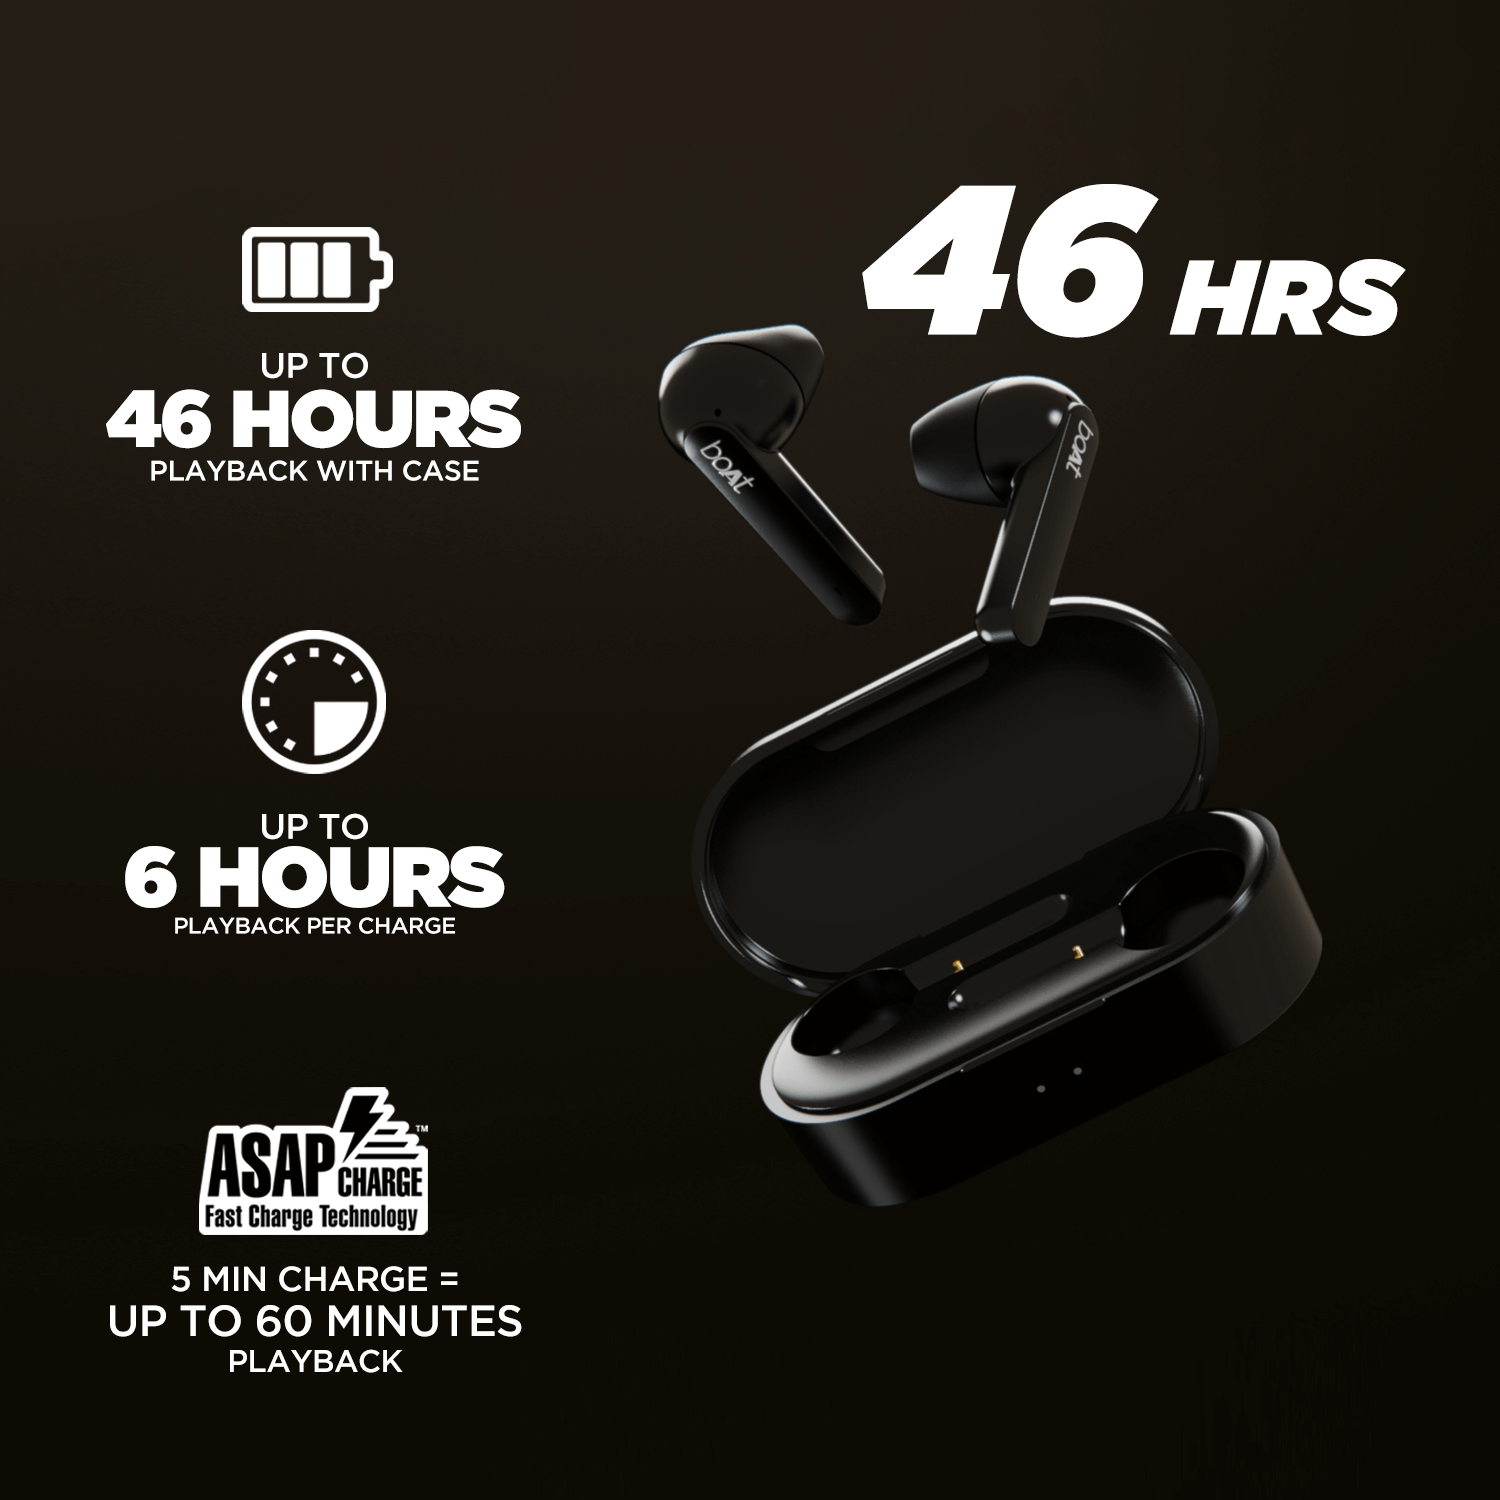 boAt Airdopes 461 | True Wireless Bluetooth Earbuds, Upto 46 Hours Playback, ASAP™ Fast Charge, 600mAh Charging Case